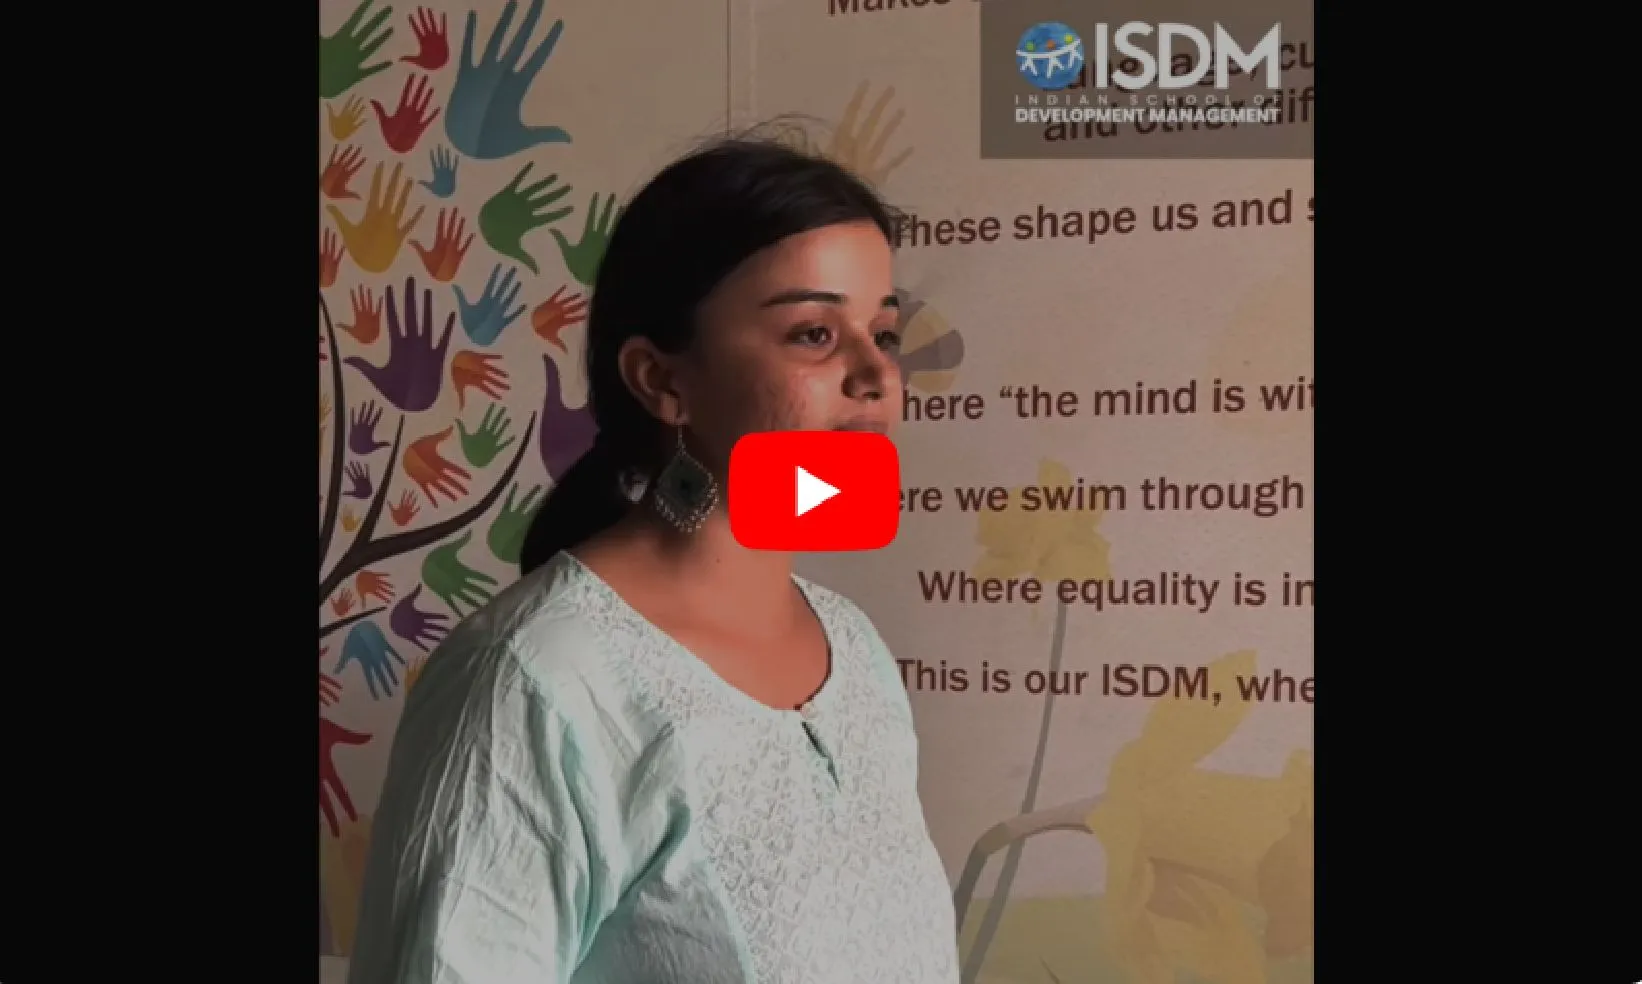 Why do young people aspire to come to ISDM? 